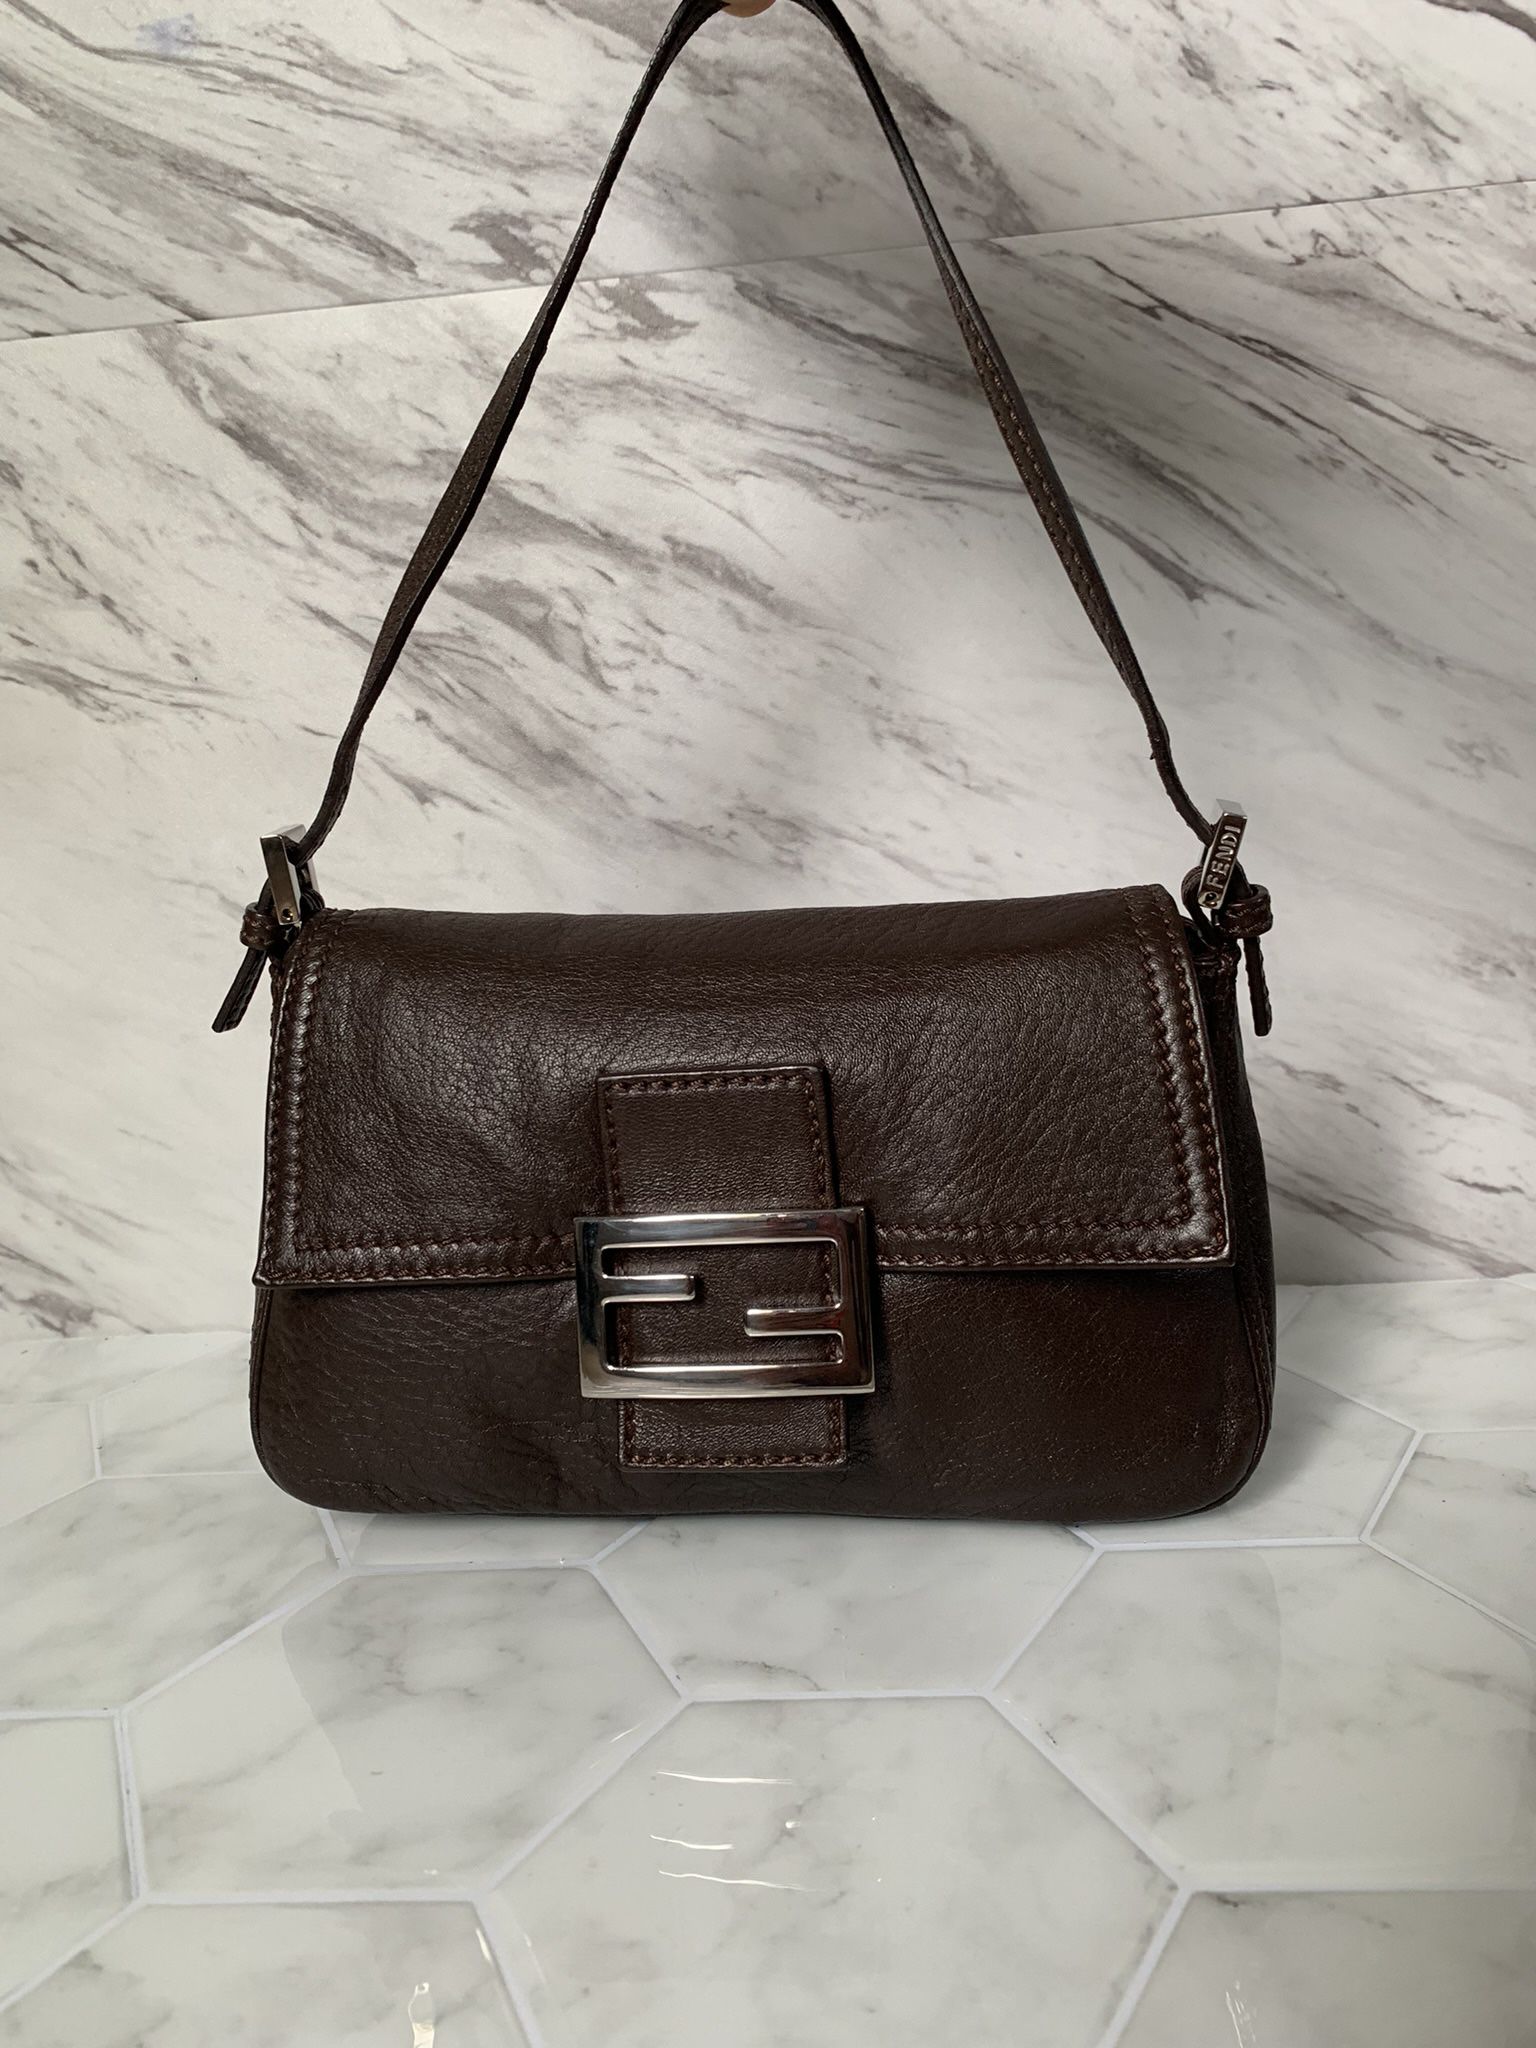 Fendi Brown Leather Baguette With Silver Accents